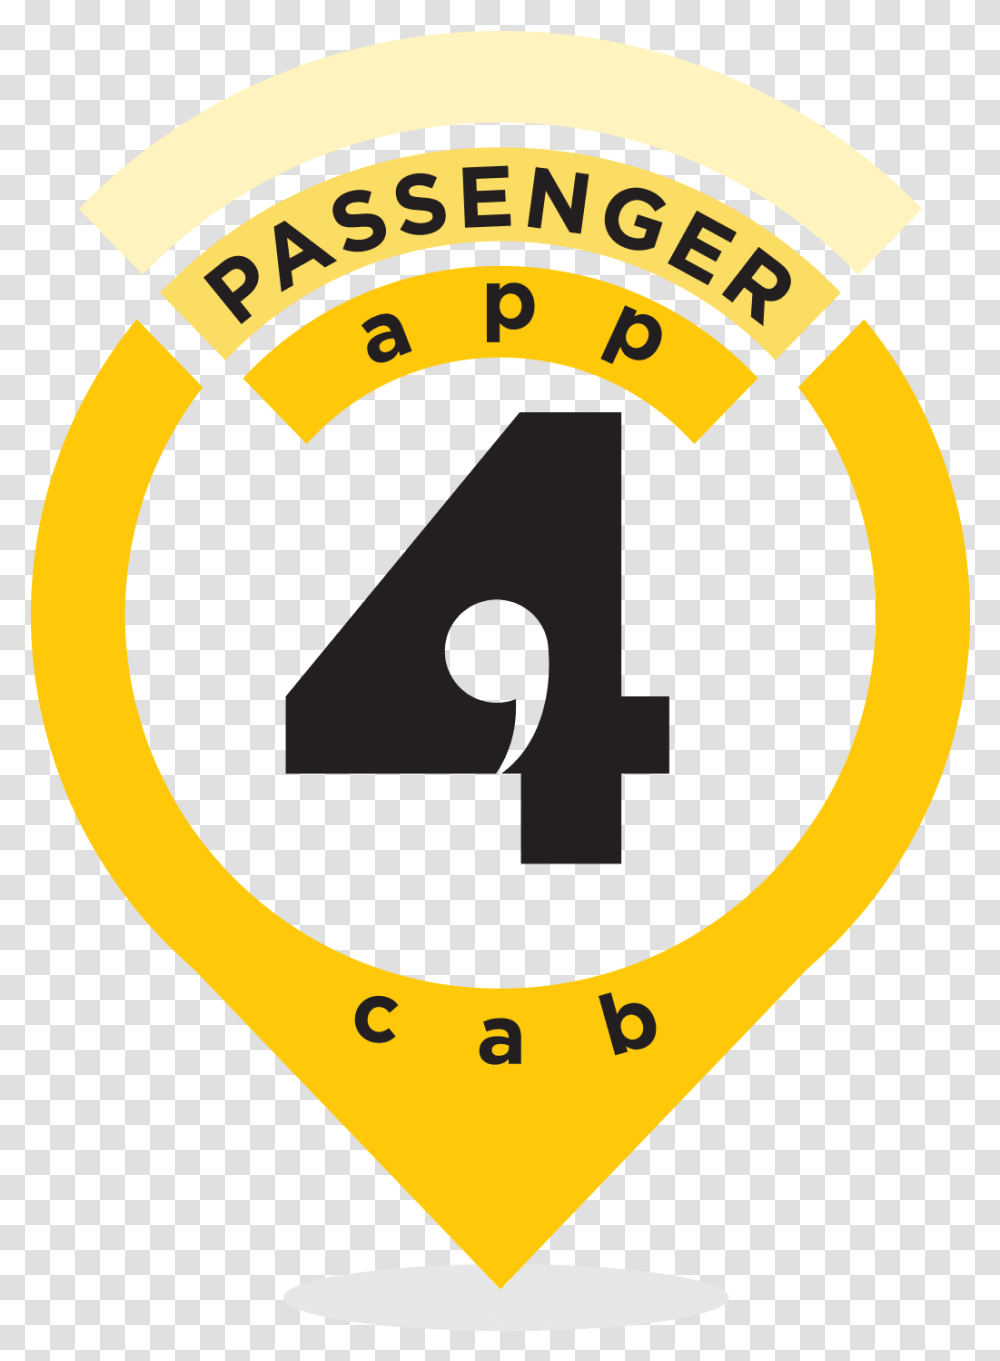 Taxi App Like Uber Request Free Demo Circle, Number, Symbol, Text, Logo Transparent Png